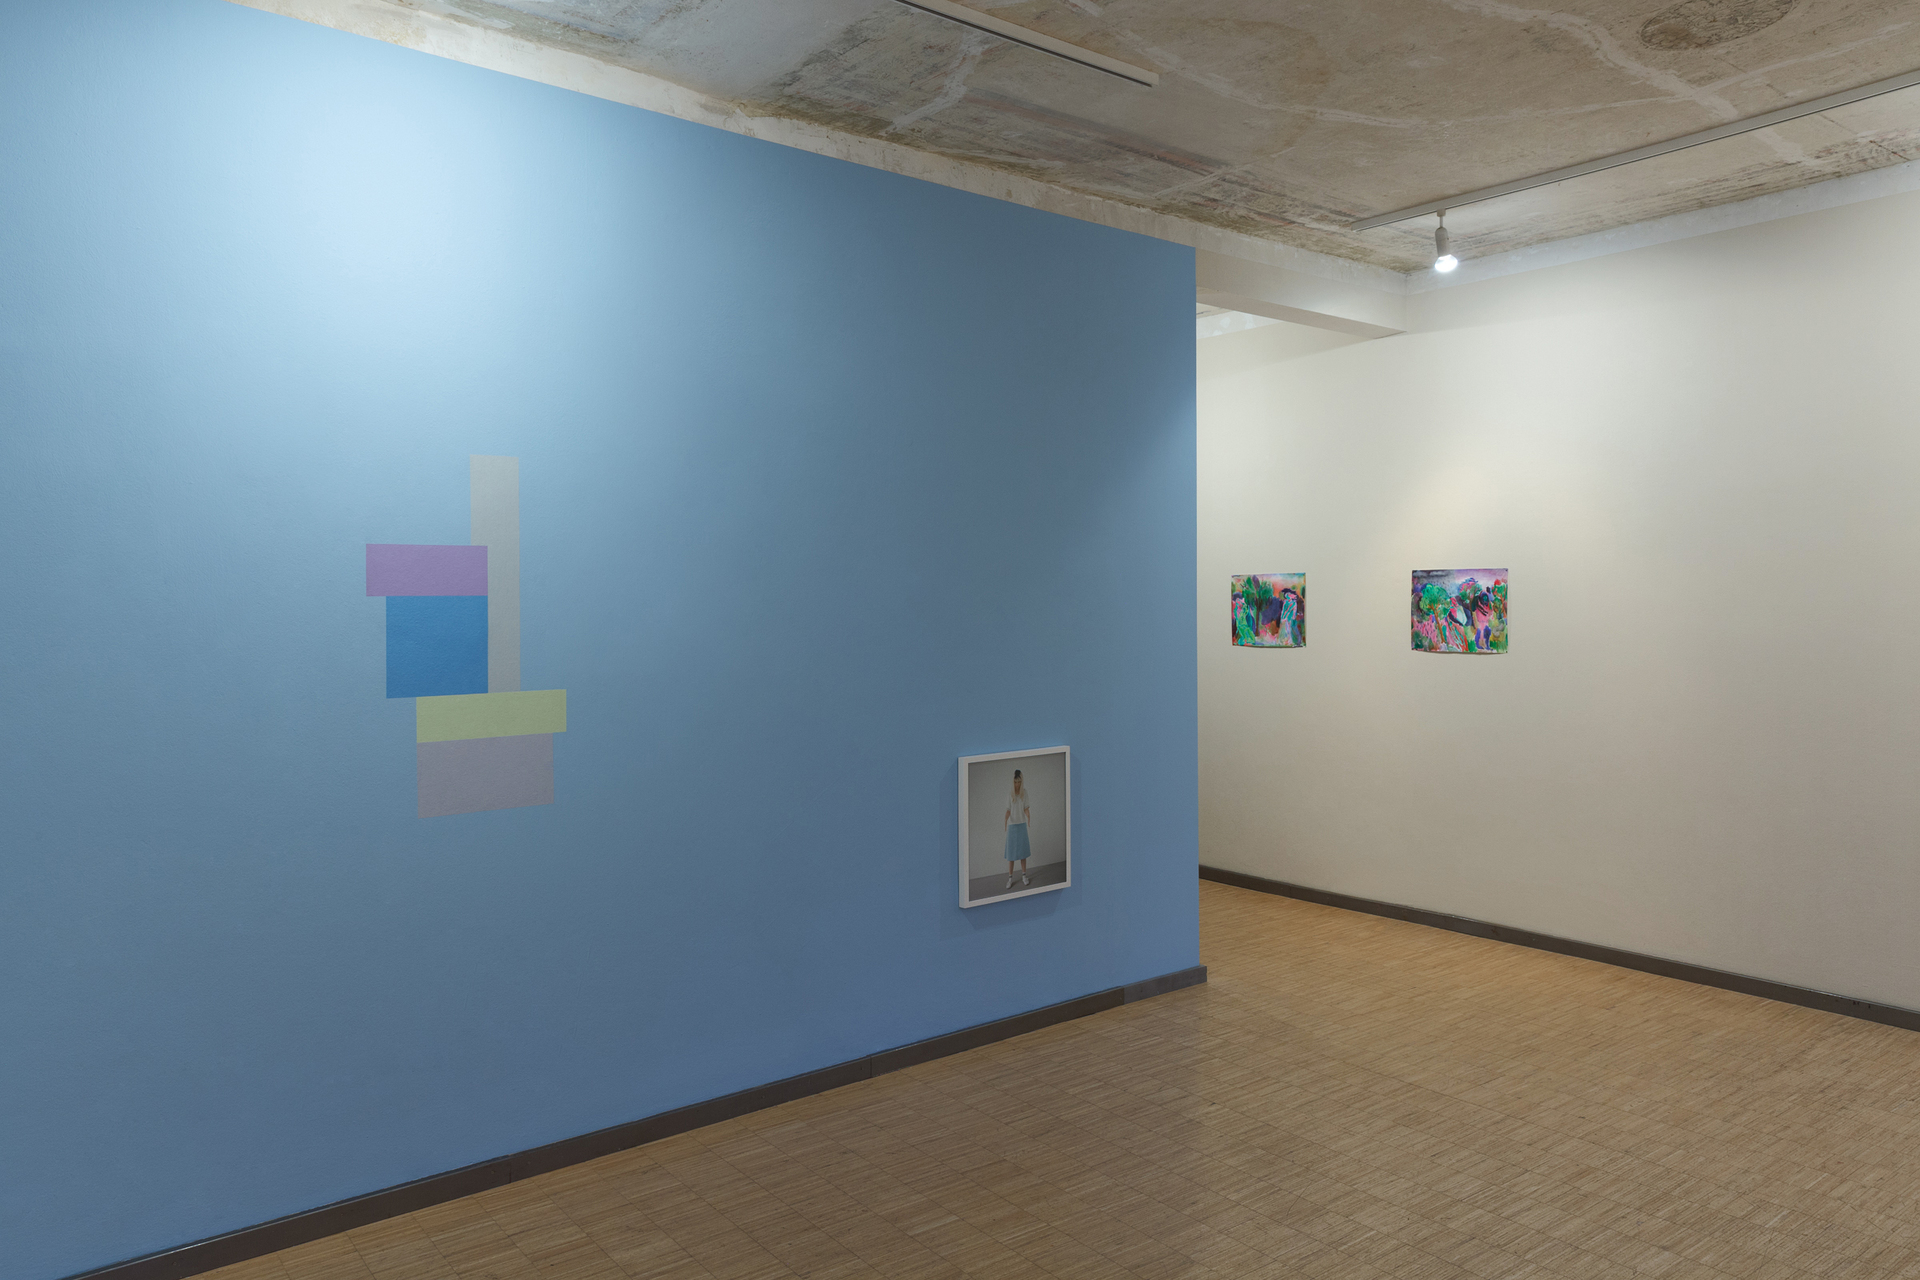 Exhibition view, Irina Gheorghe, 'Methods for the Study of What Is Not There', mixed media installation (tape on wall, photography, paint, dimensions variable); René Spitzer (on the right side)
, 'De-extinction DKPL2', 
2021
 and 'Sunset Ah Ah', 2021, both watercolour on paper